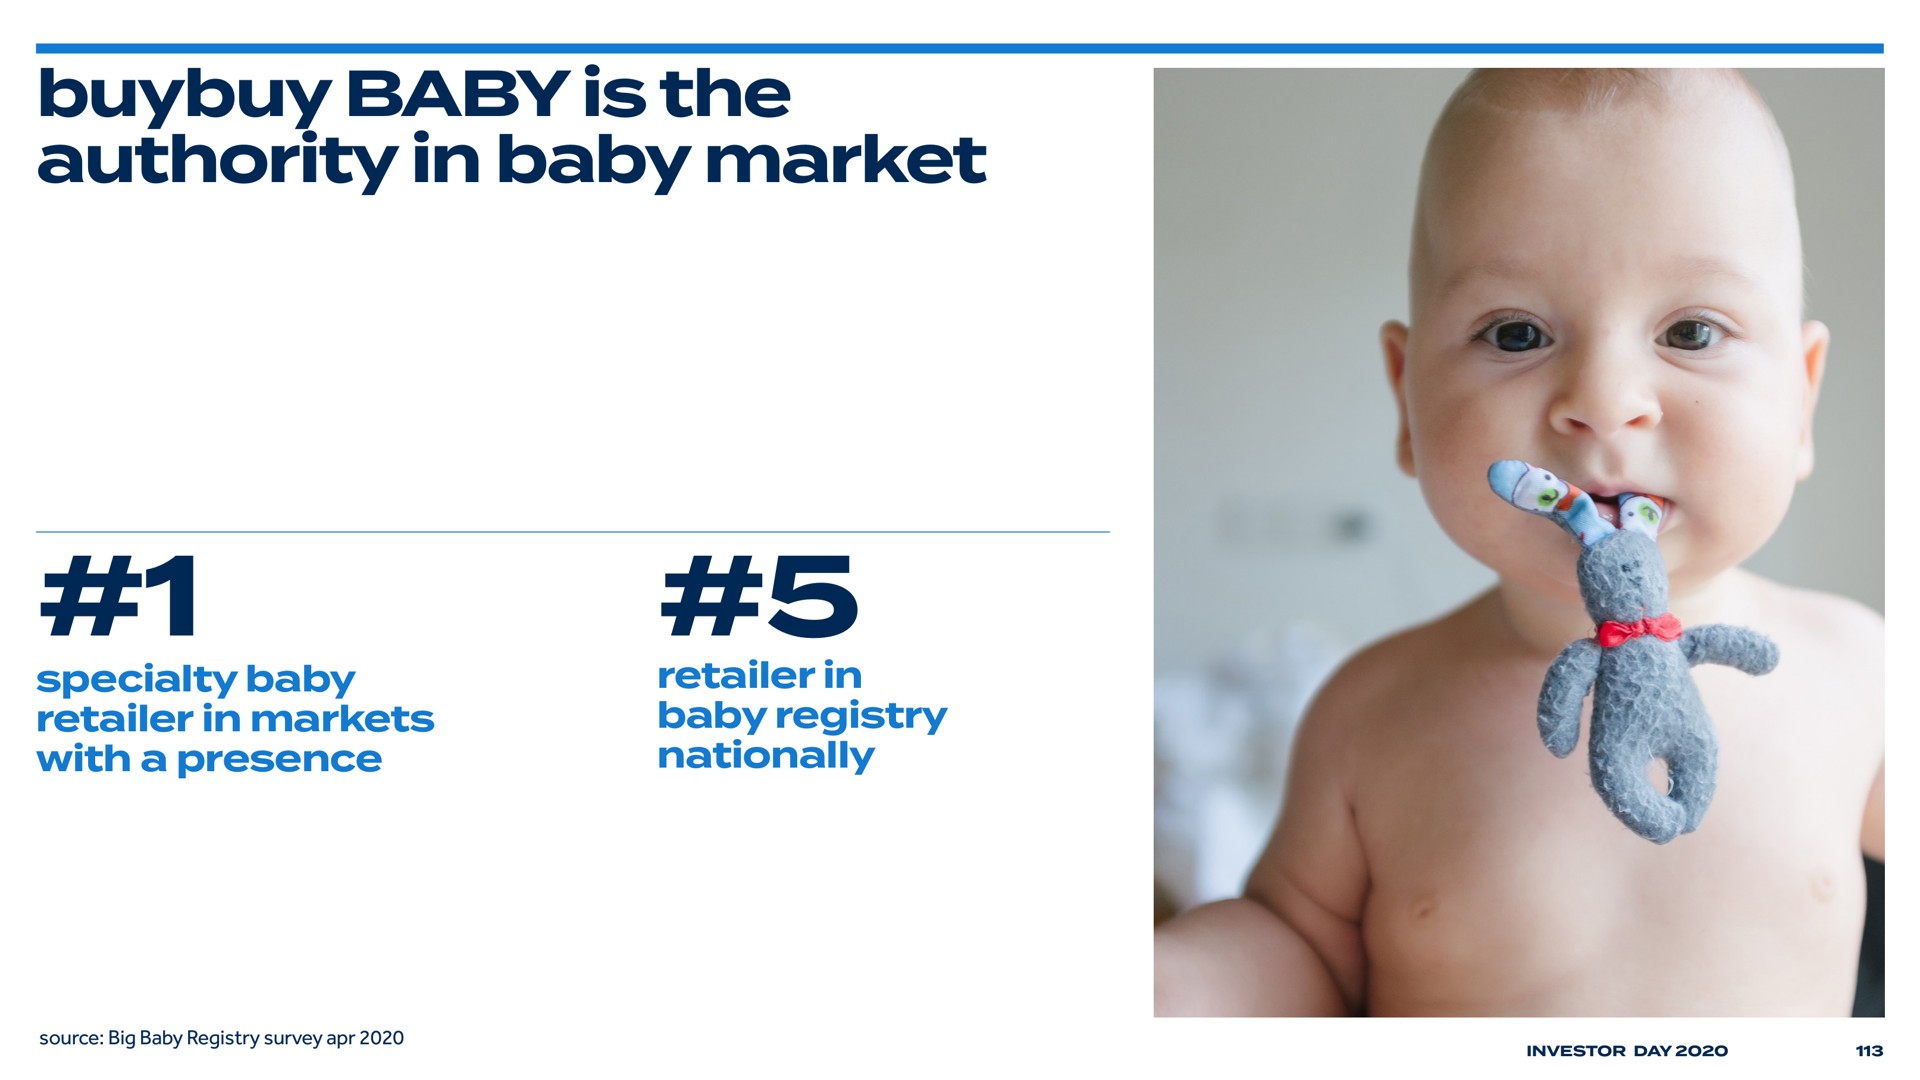 baby is the authority in baby market | Bed Bath & Beyond